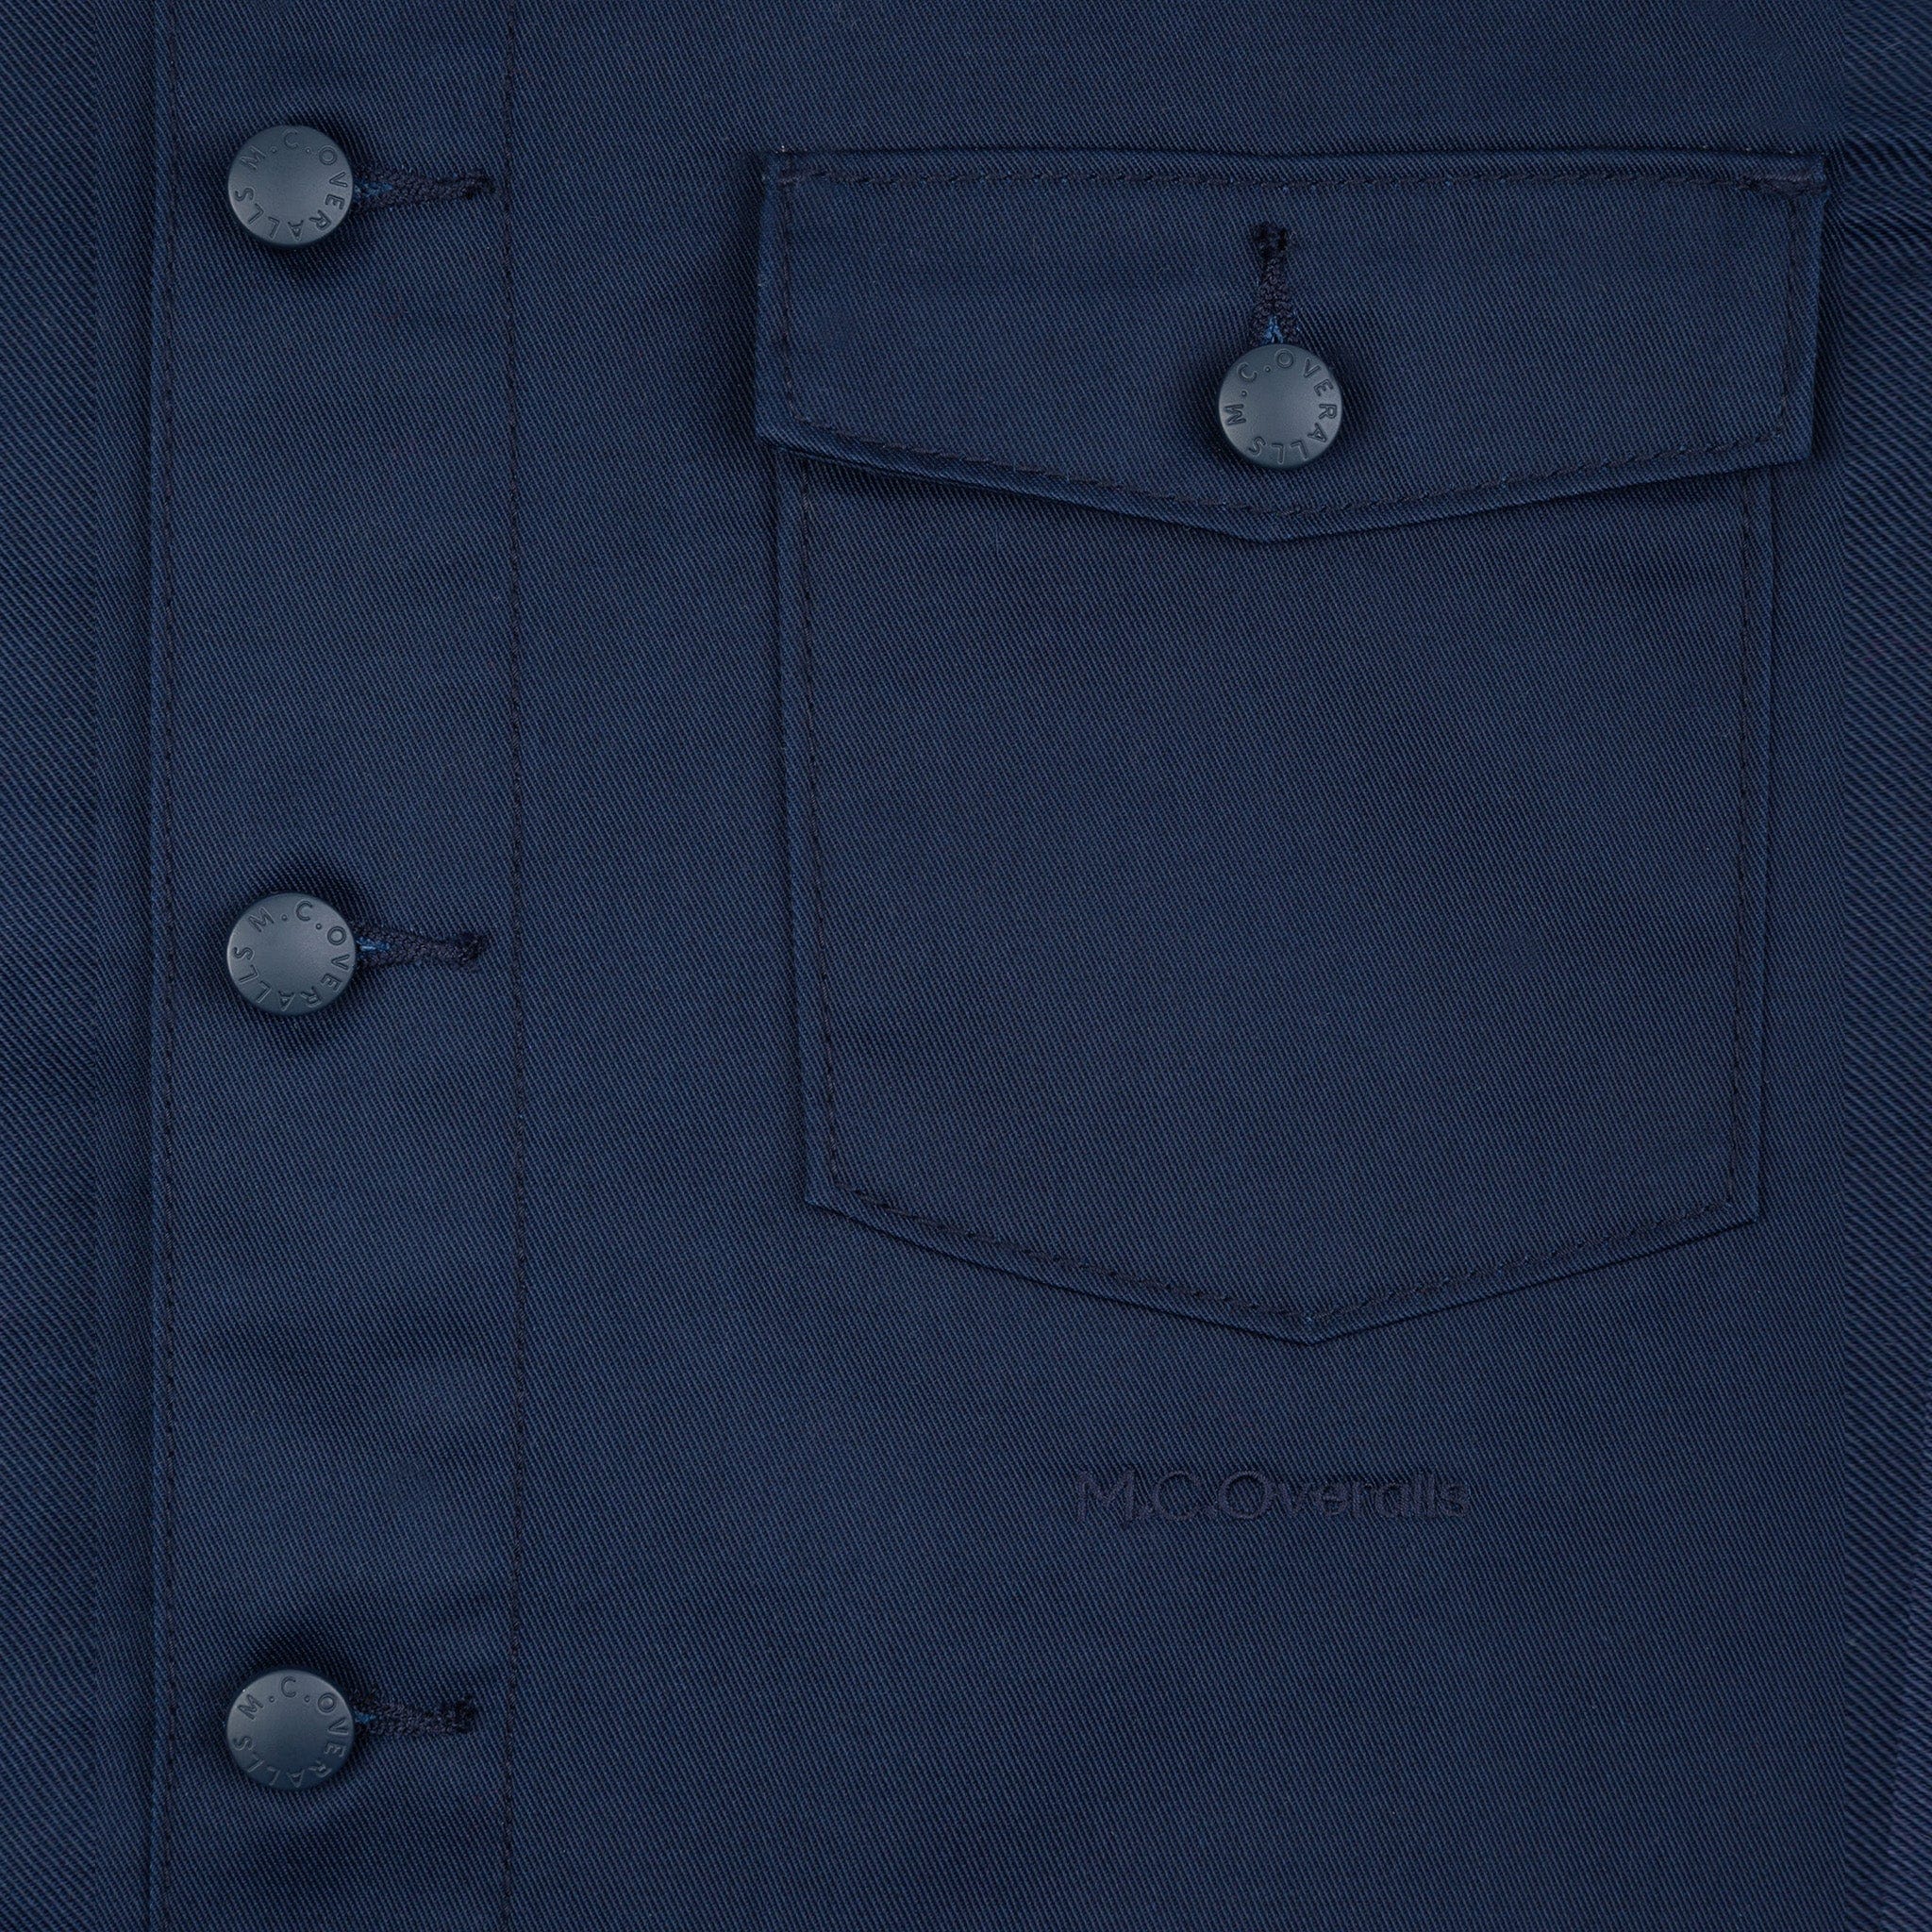 M.C.O's Logo Placed below the Pocket of Polycotton Navy Work Jacket.